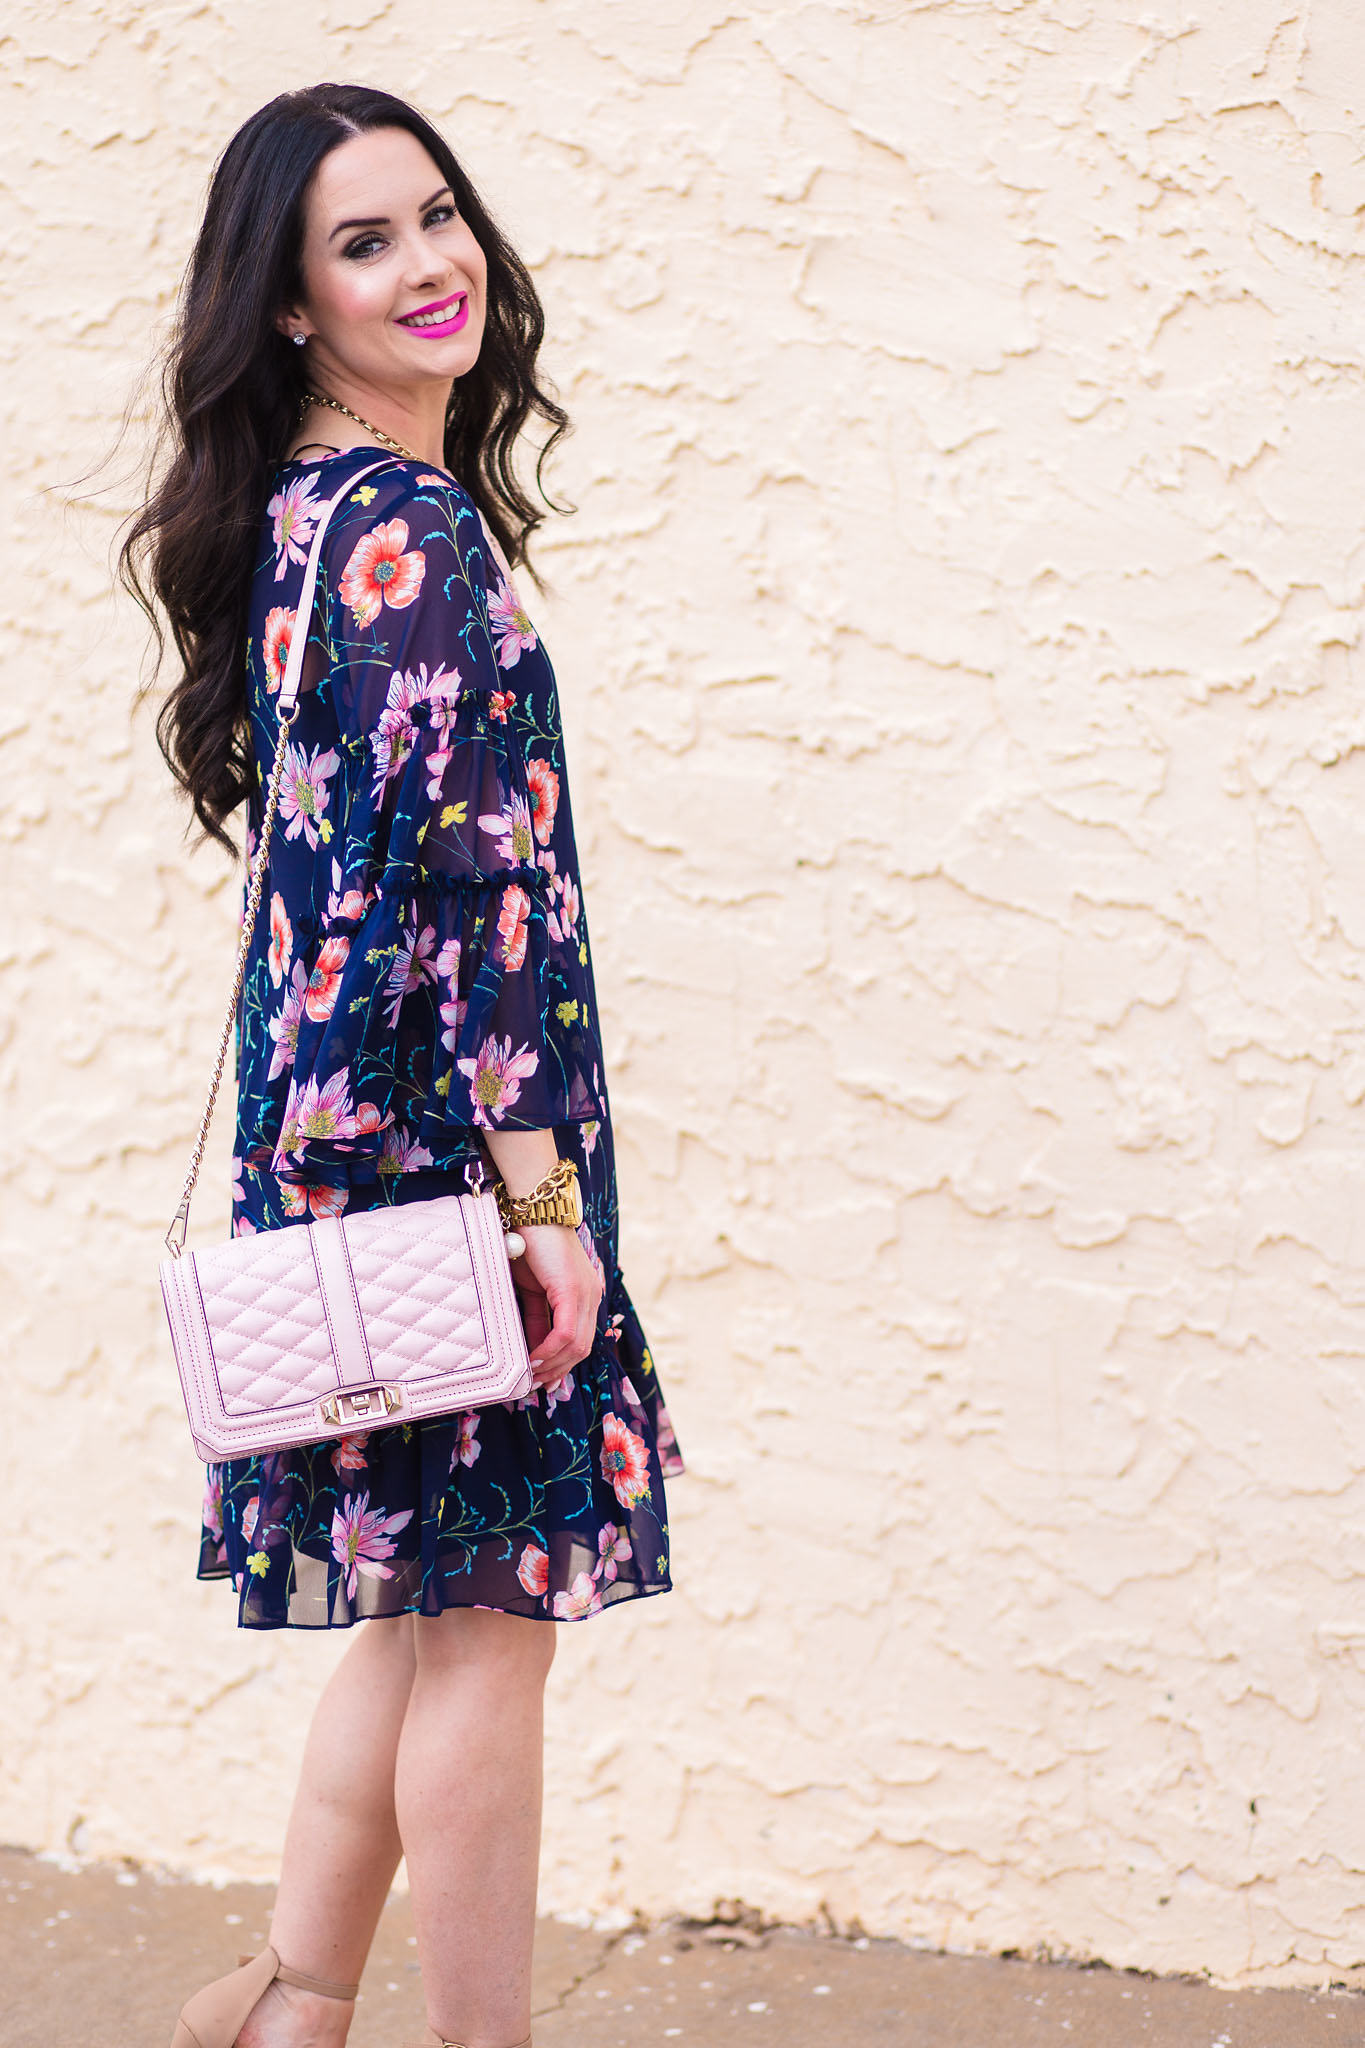 Favorite Easter Dresses Roundup - The Double Take Girls